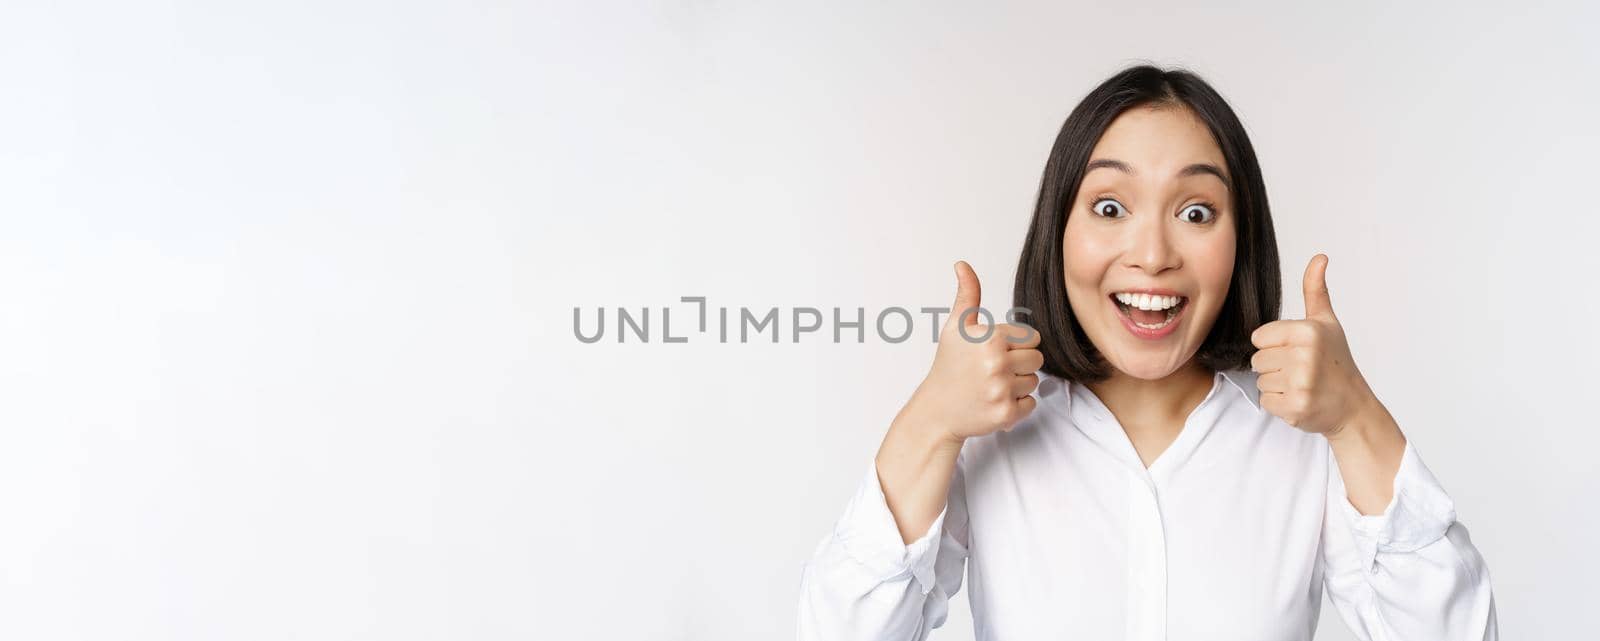 Enthusiastic asian girl showing thumbs up and smiling, pleased by something, recommending smth good, standing over white background.